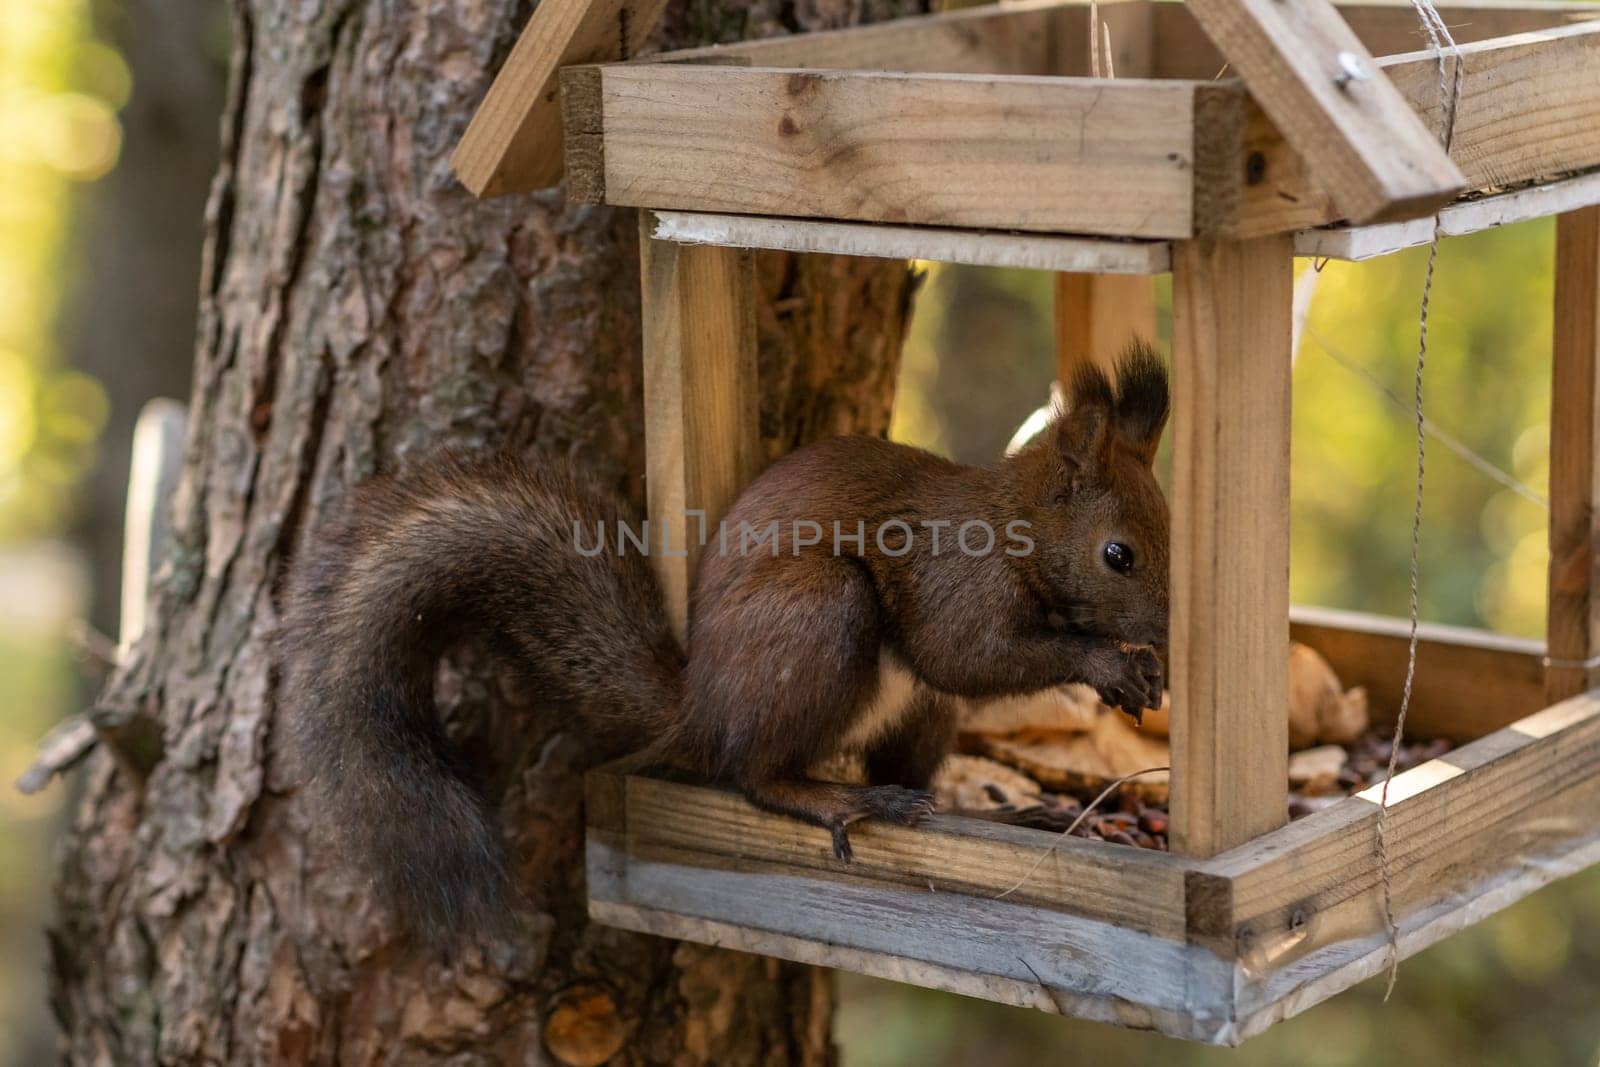 A beautiful red squirrel climbs a tree in search of food. A squirrel sits in a feeder eating nuts and seeds close-up.